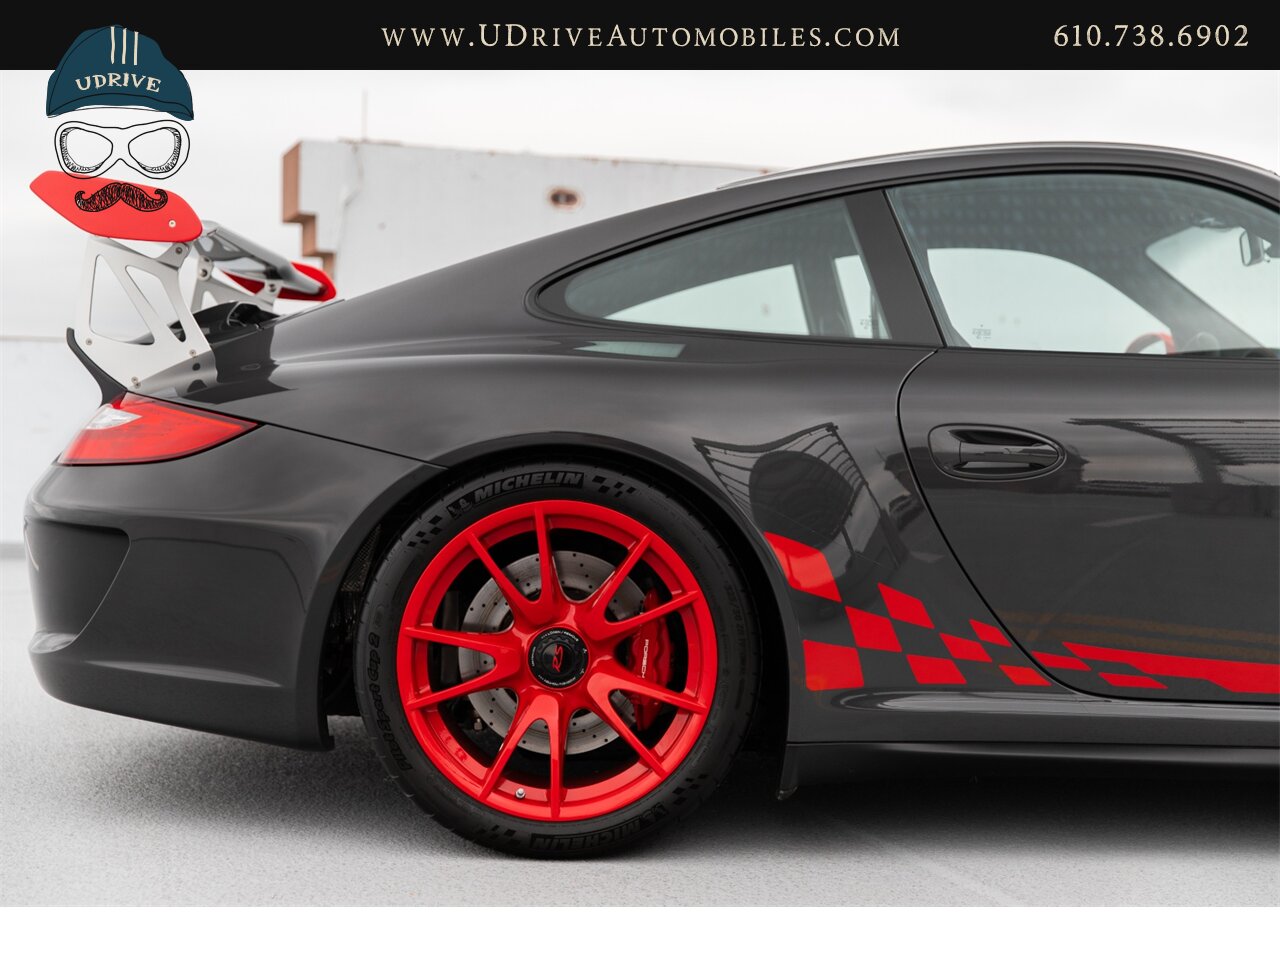 2010 Porsche 911 GT3 RS 1k Miles Dev Red Stitching Throughout  Front Axle Lift Sport Chrono 997.2 - Photo 22 - West Chester, PA 19382